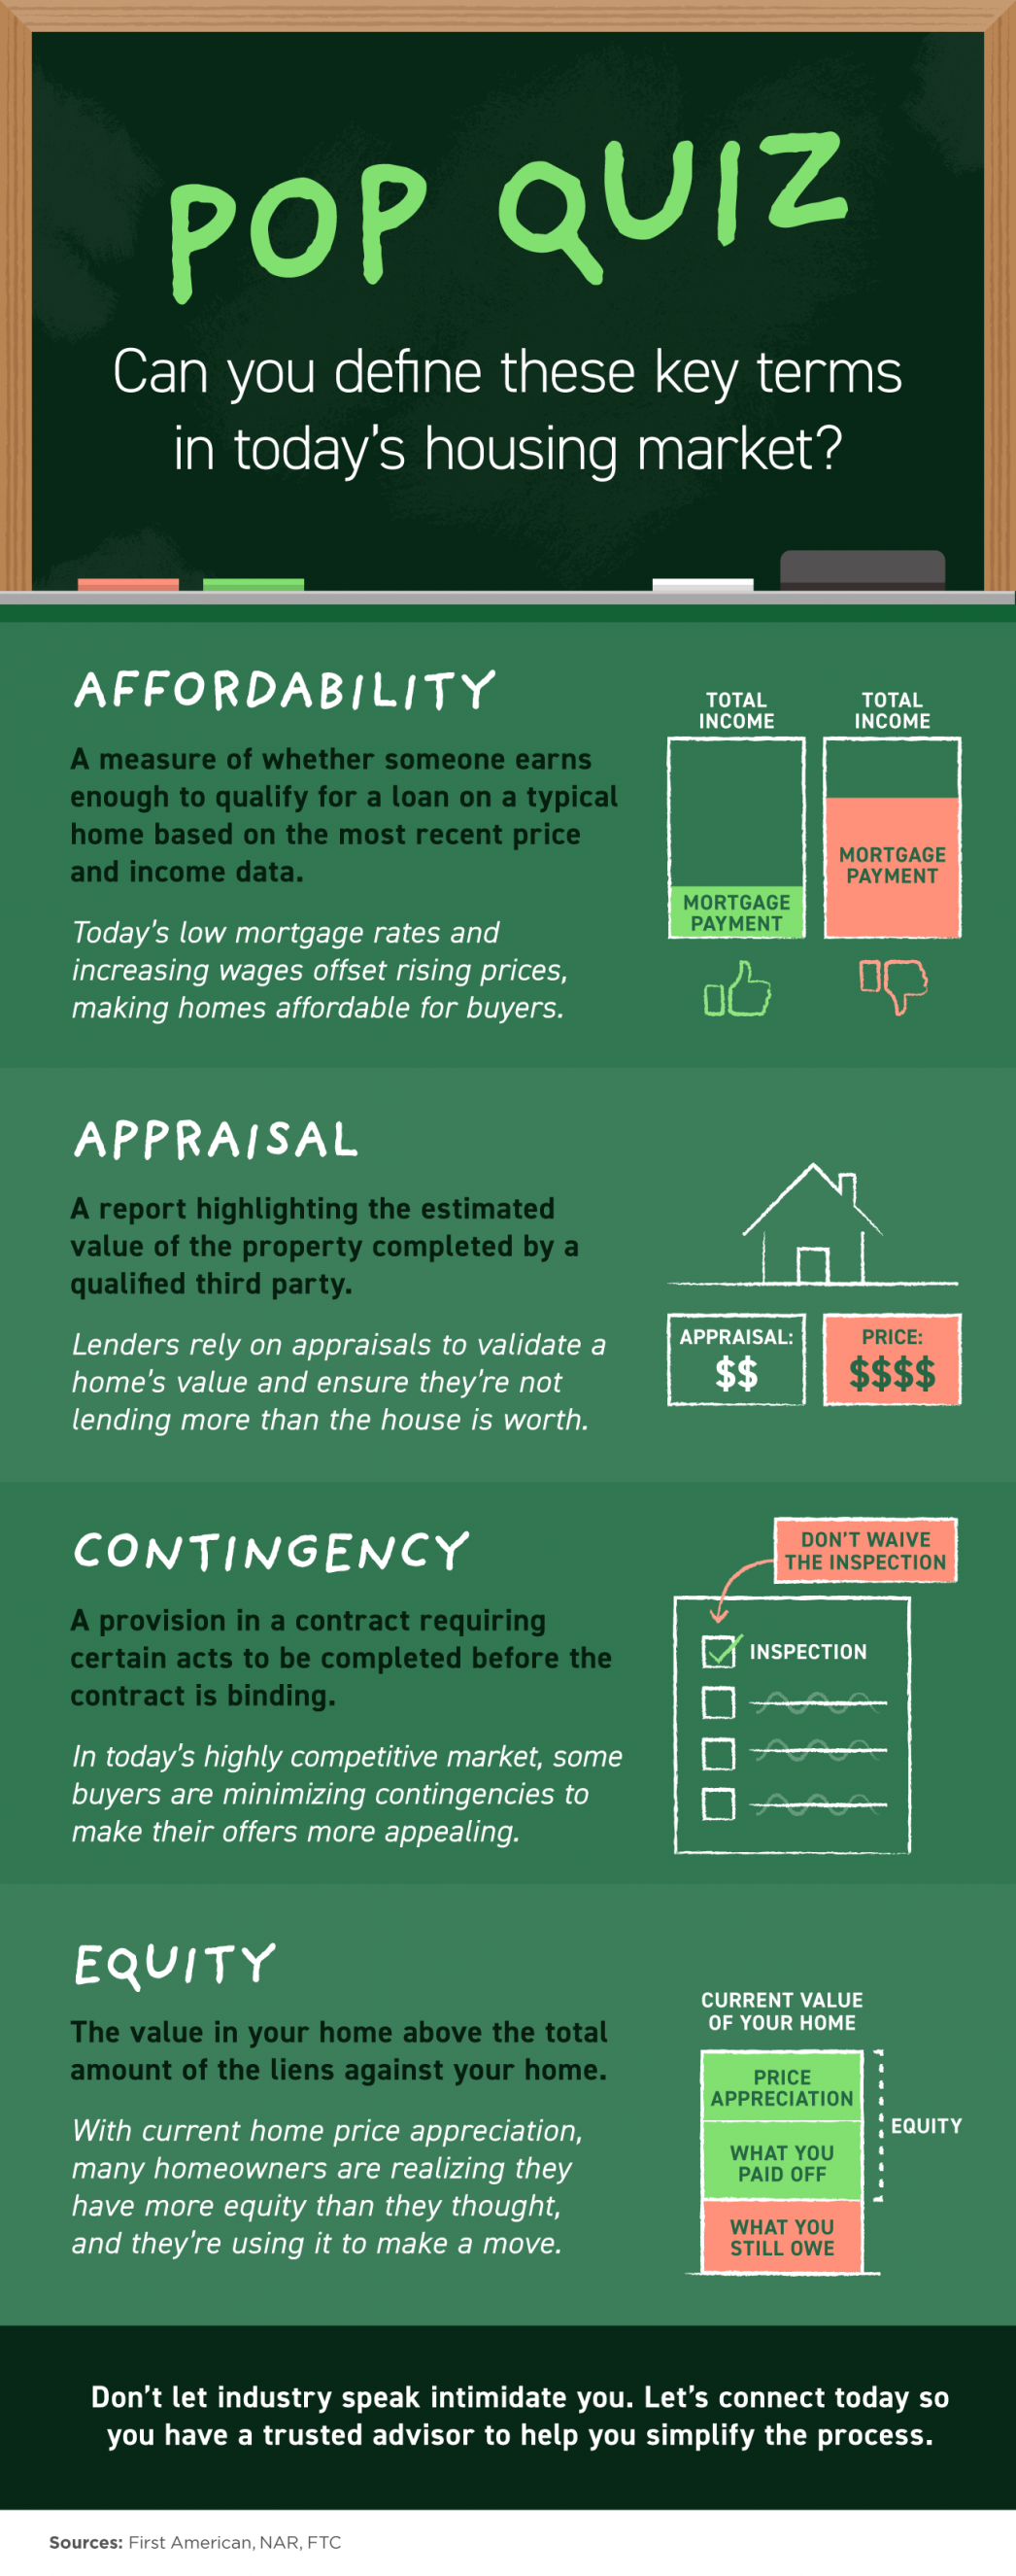 Pop Quiz: Can You Define These Key Terms in Today's Housing Market? [INFOGRAPHIC] | MyKCM